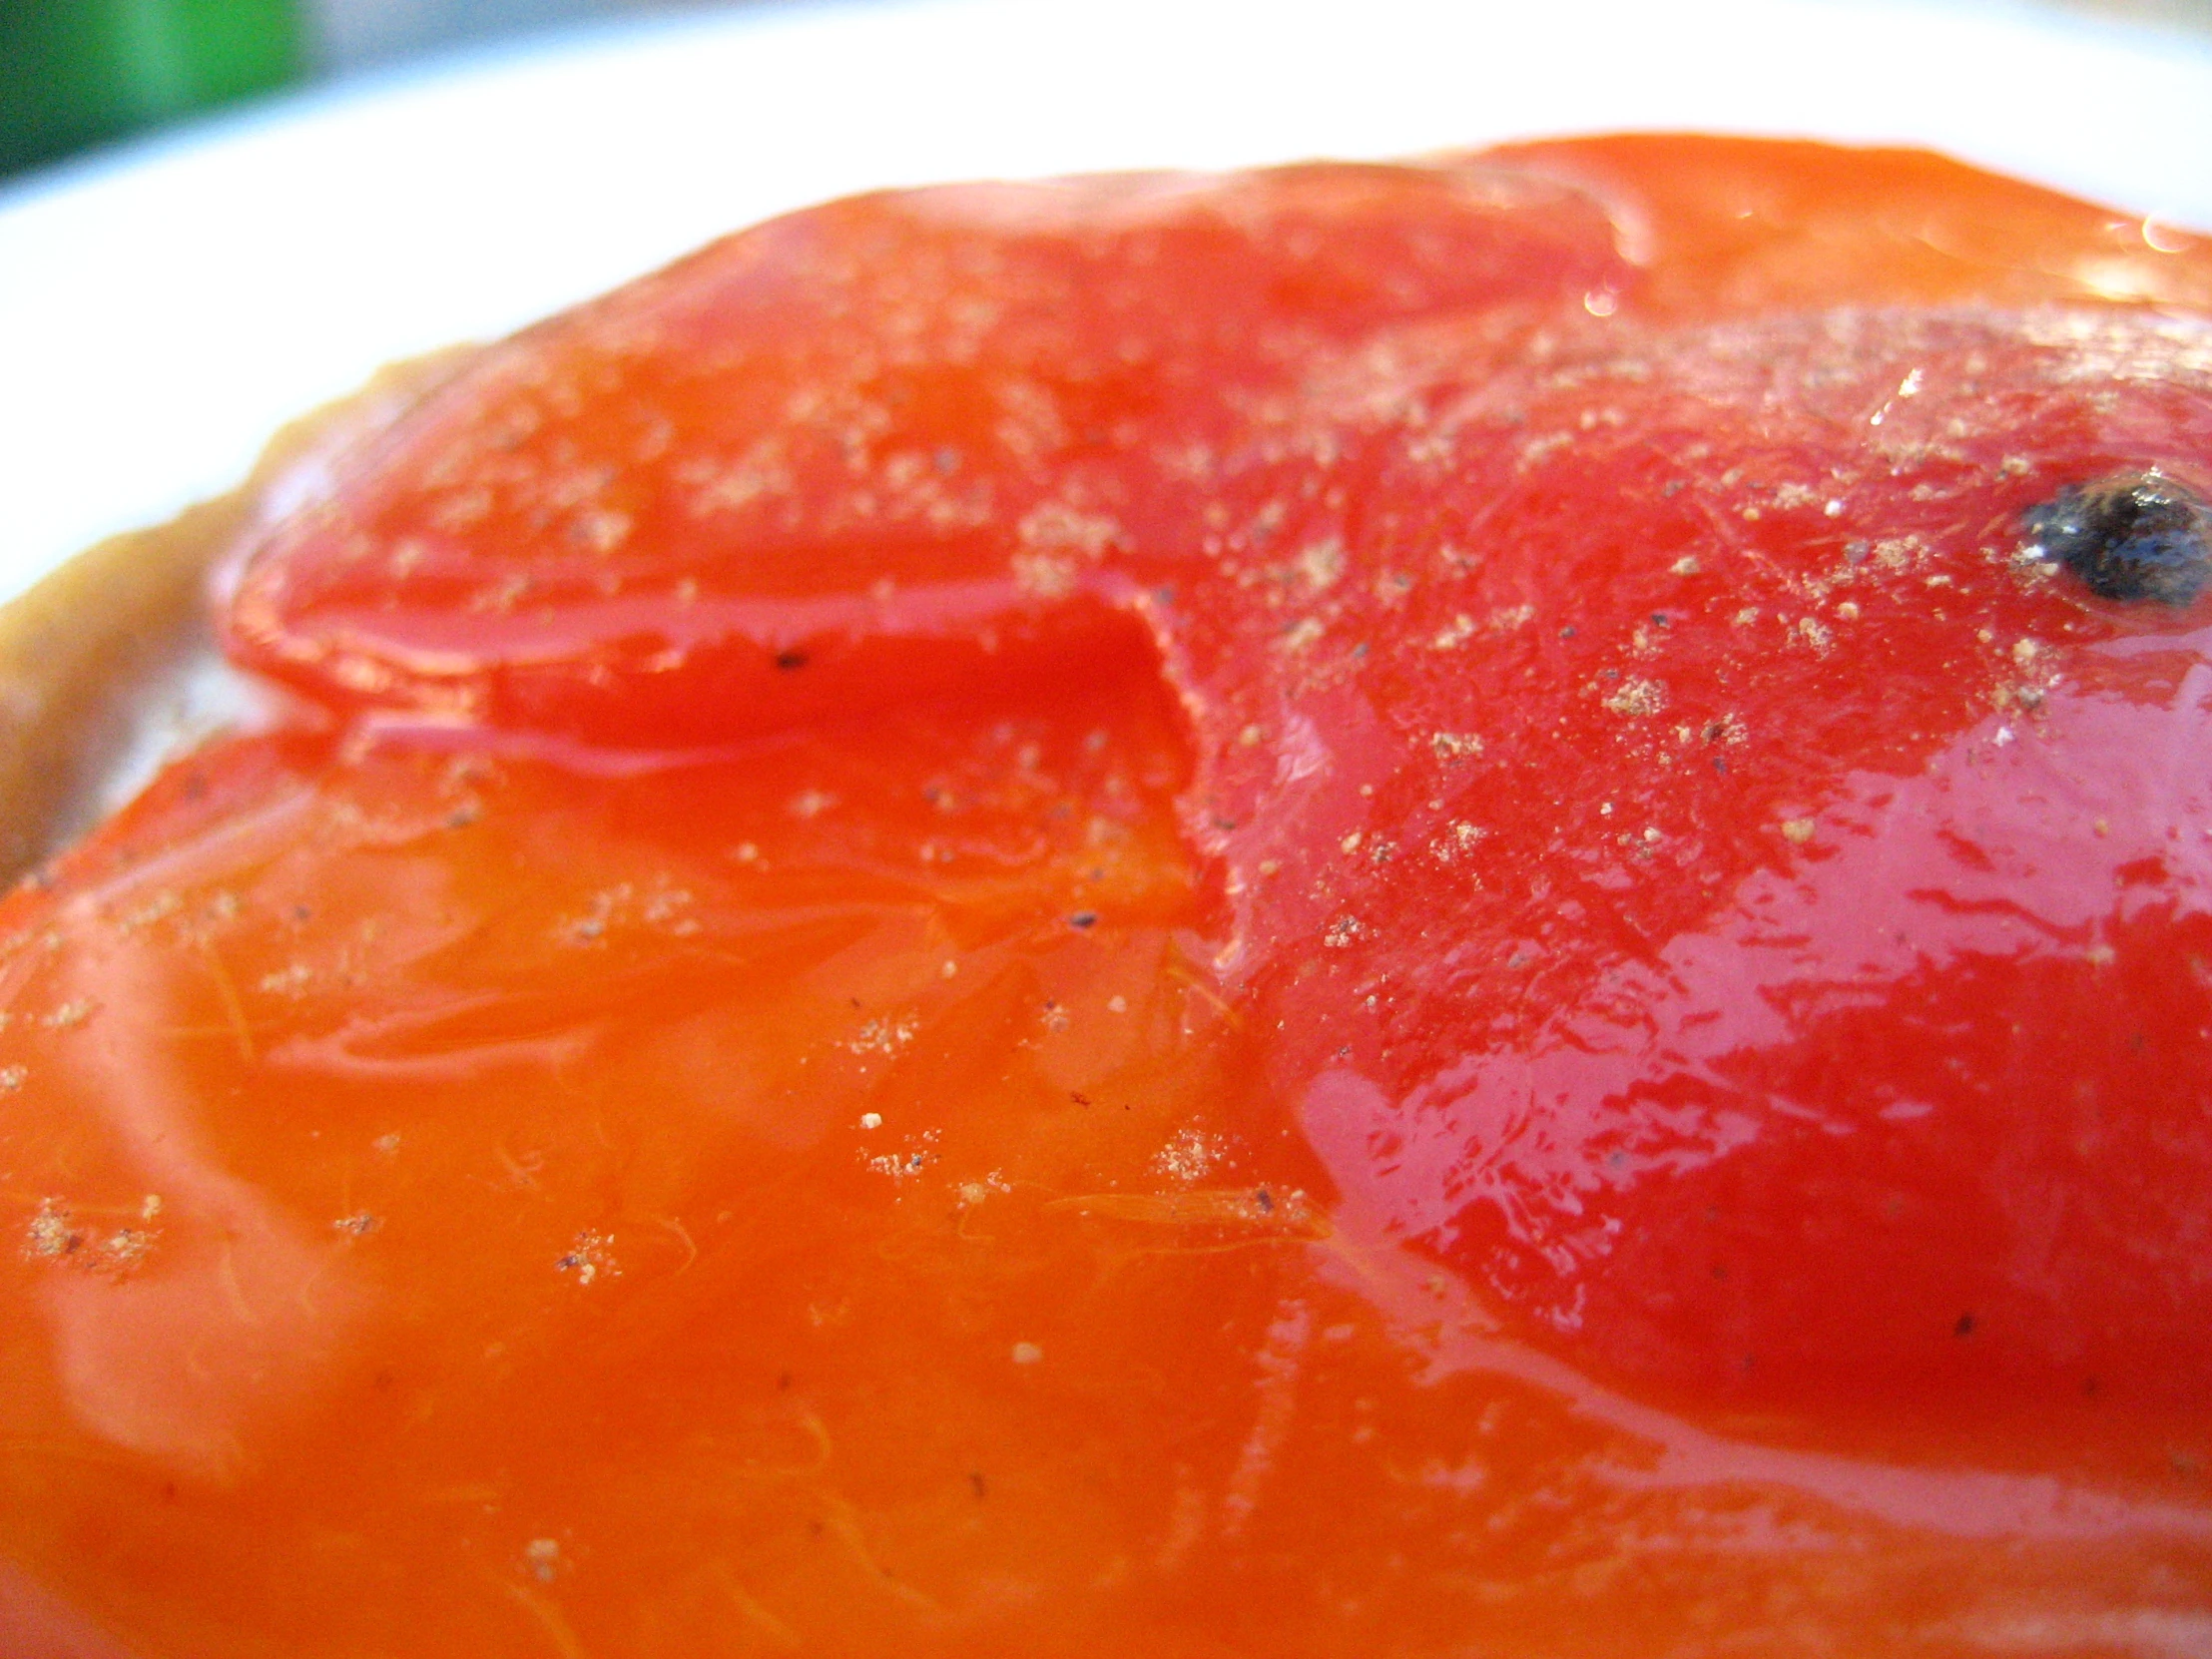 a close up picture of a jelly sandwich